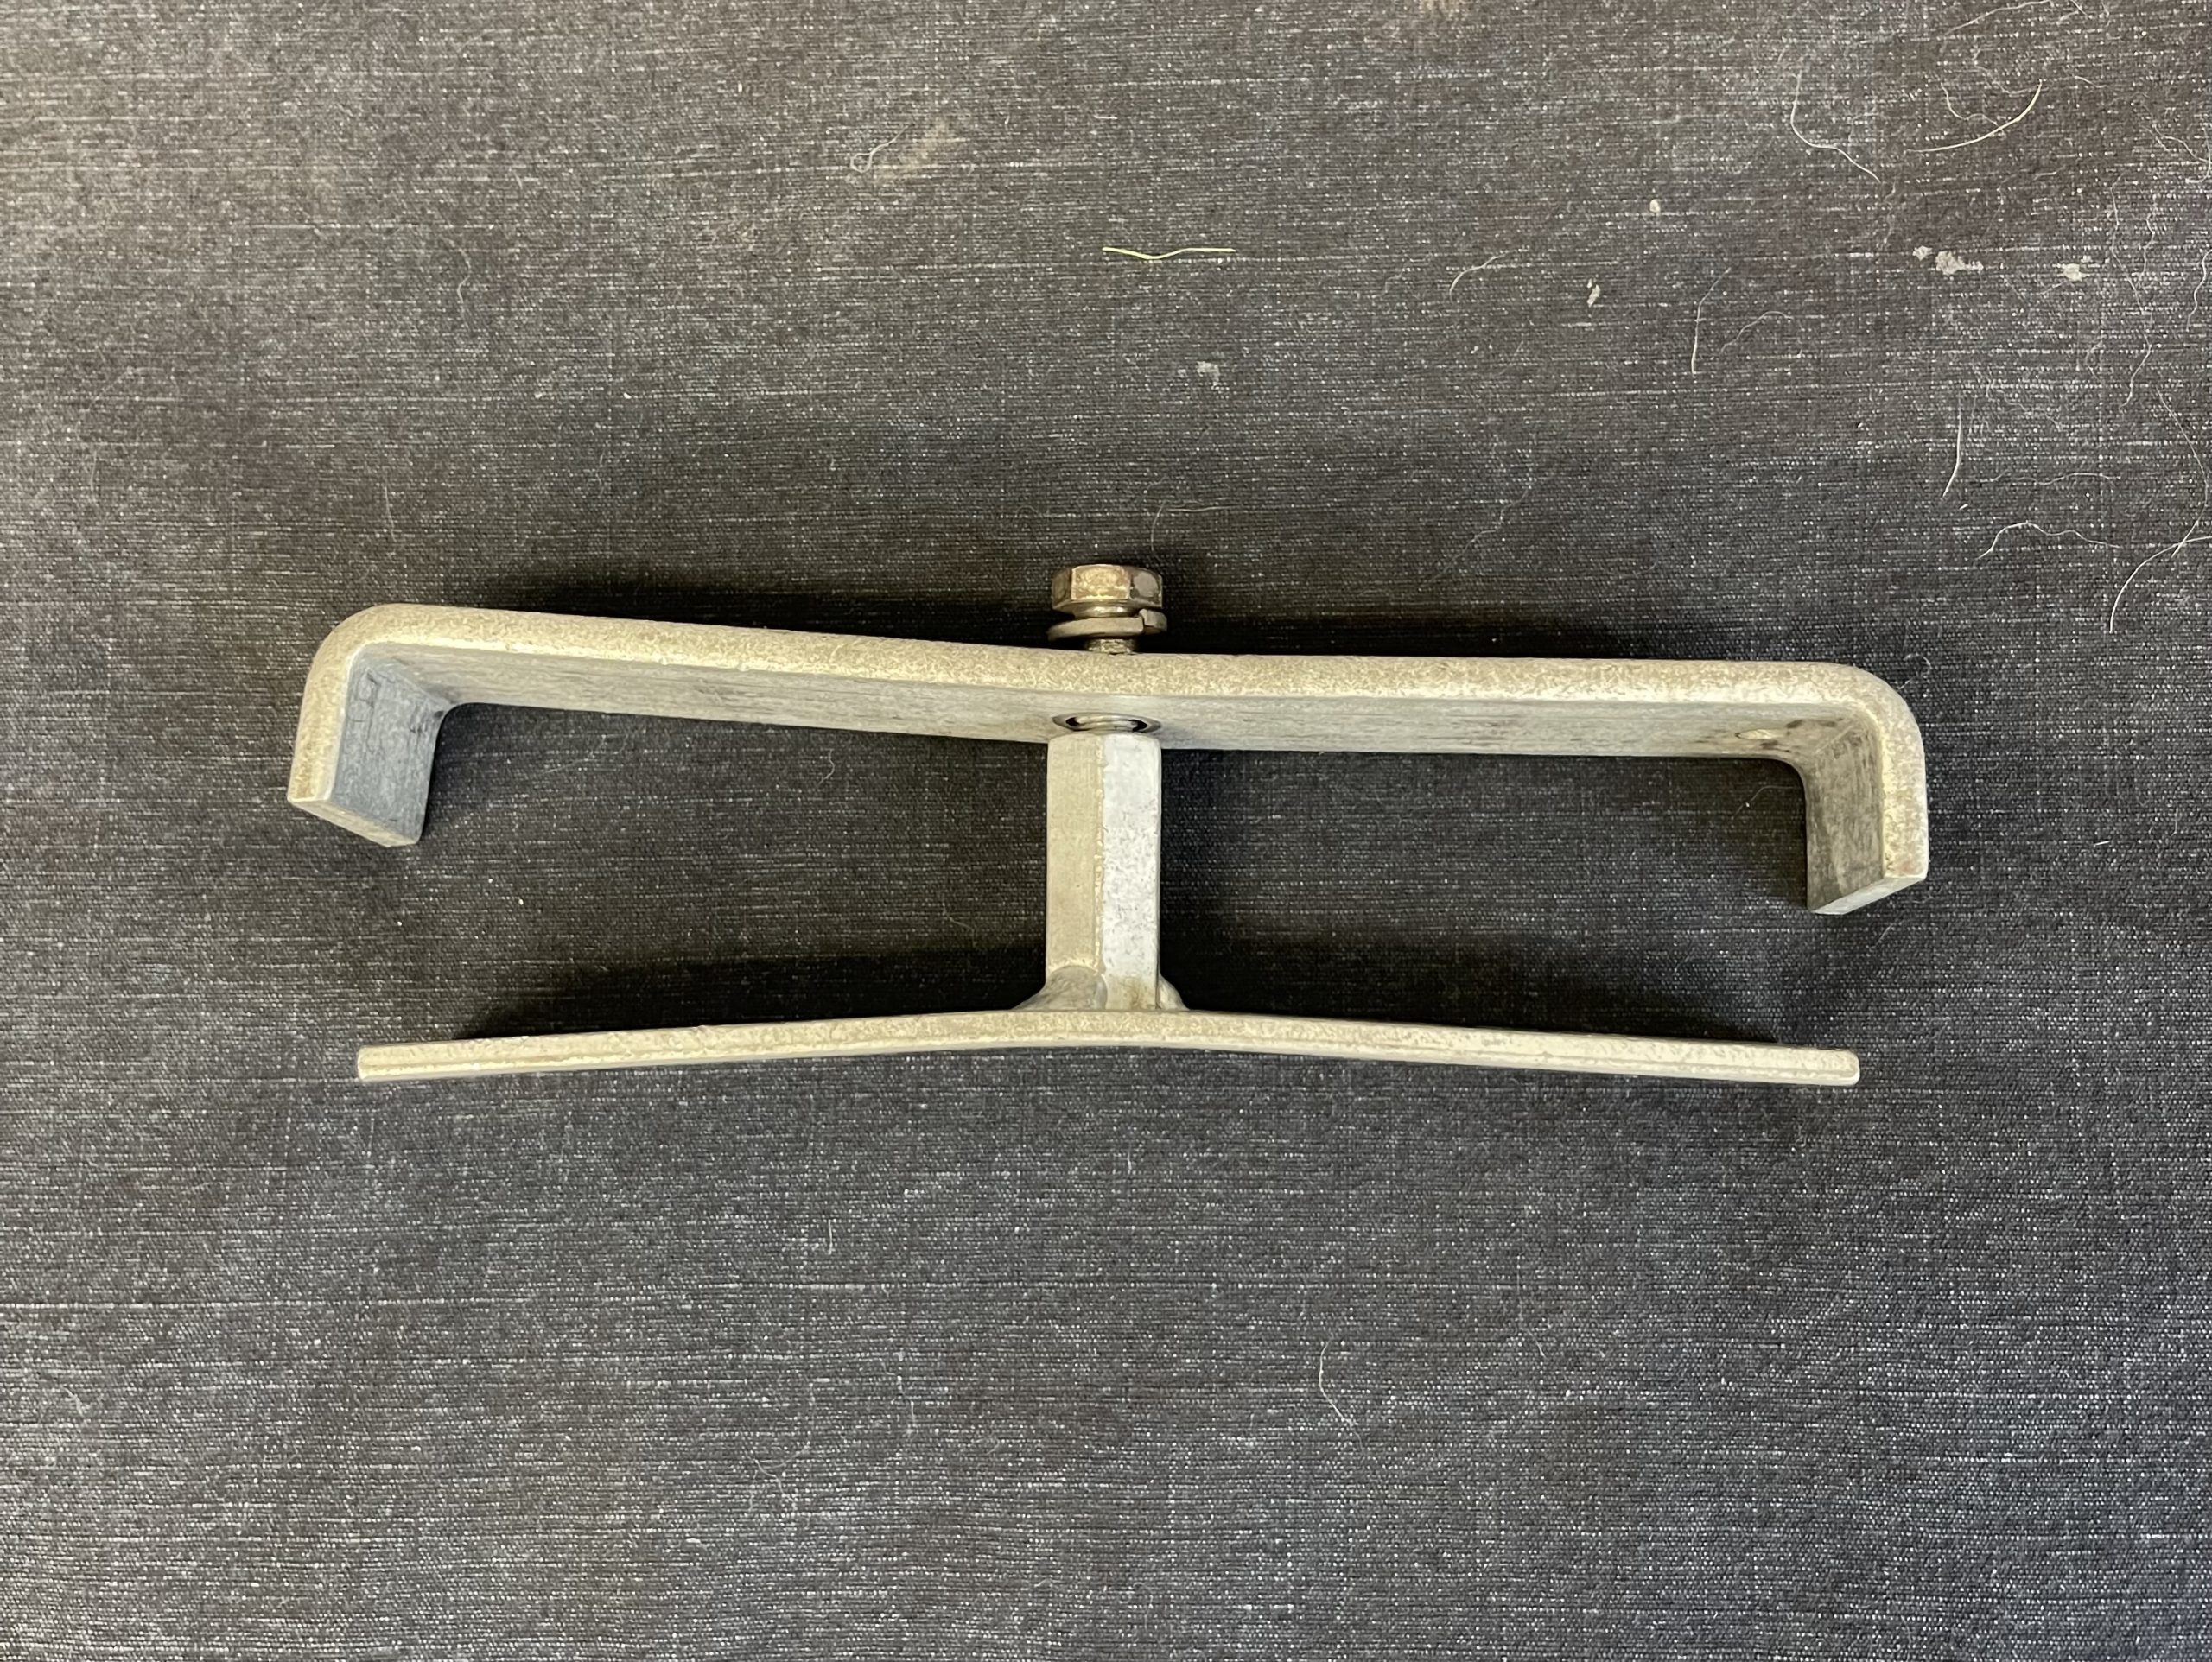 Stage leg clamp